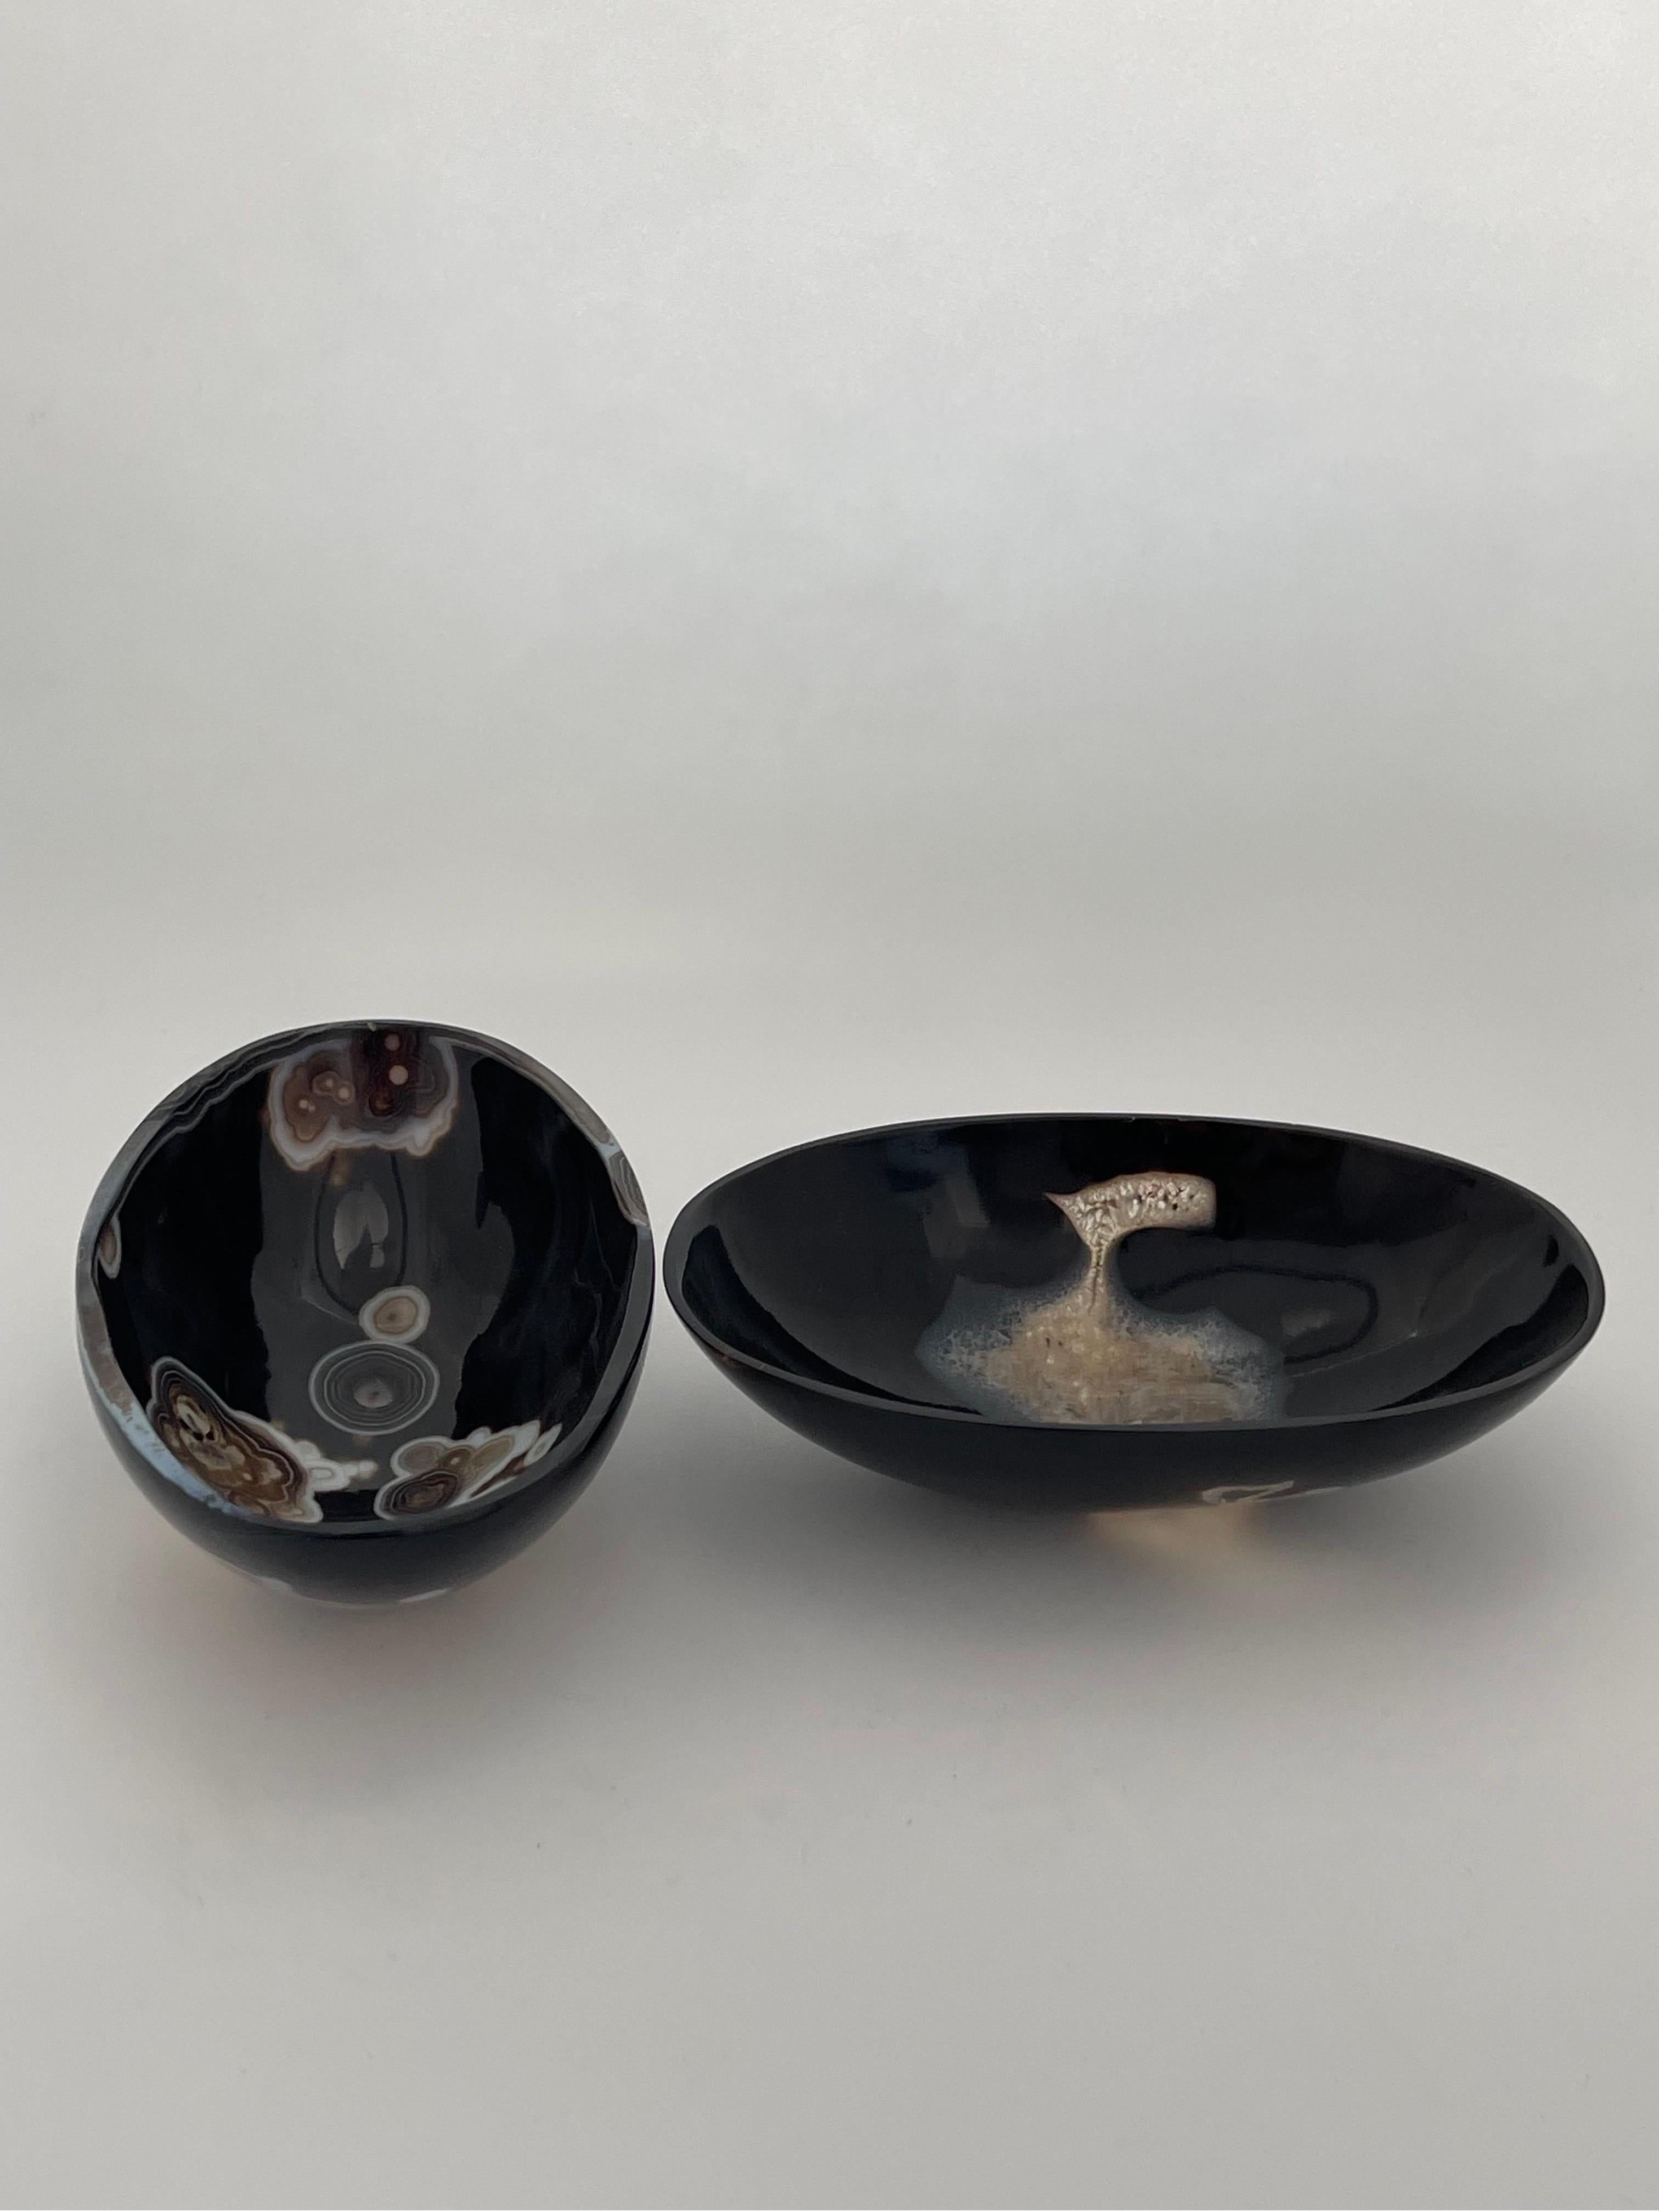 Pair of semi precious Agathe bowl , warm brown, white and black tones. Hand carved oval shape in Brazil circa 1990.
Good condition
Set if 2 price for one 
Long 13,5 cm width 8cm height 4cm.